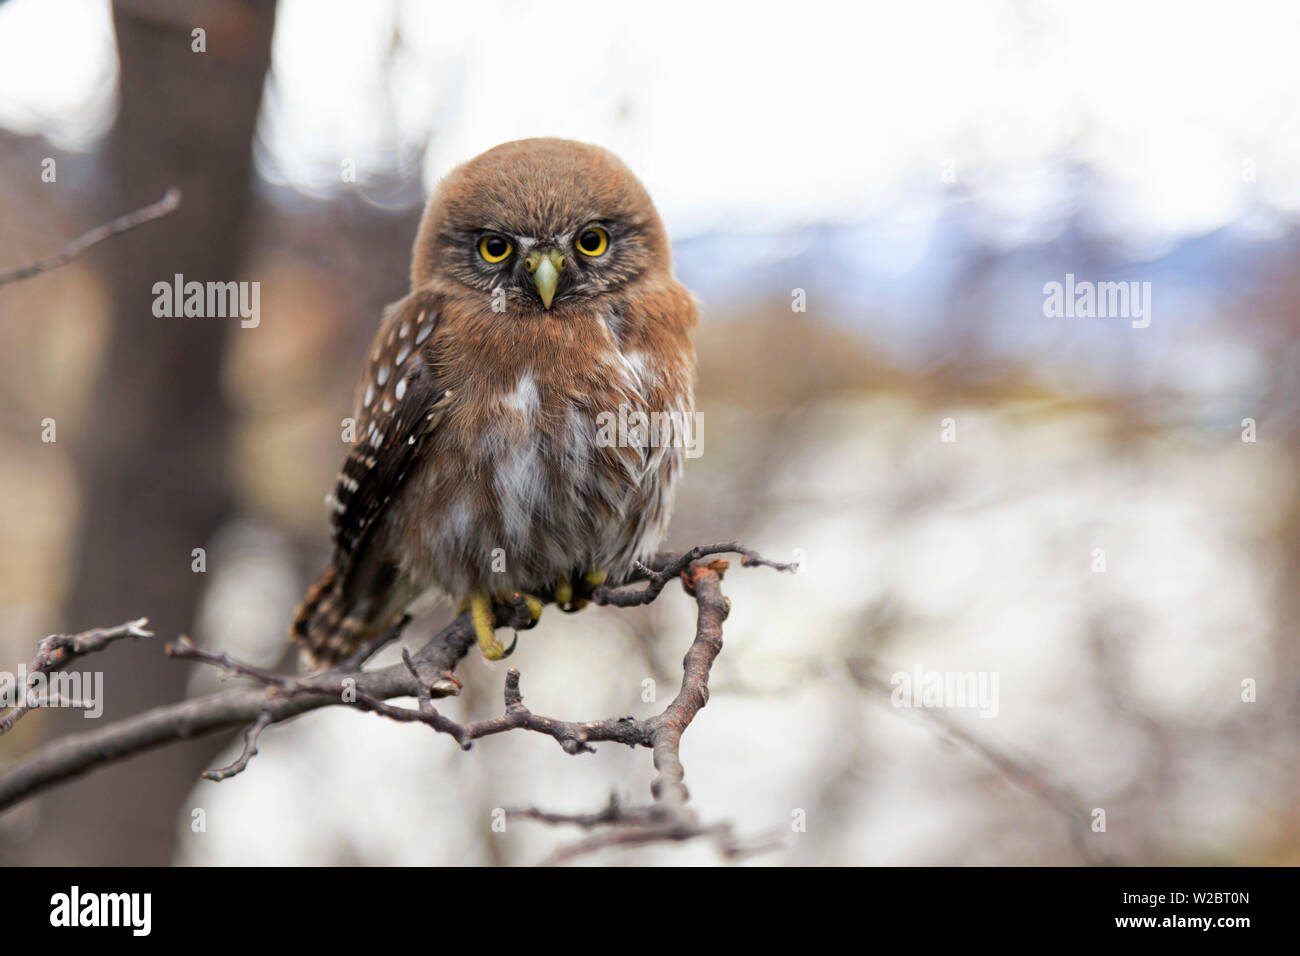 Chile, Patagonia, Torres del Paine National Park (UNESCO Site), baby owl Stock Photo